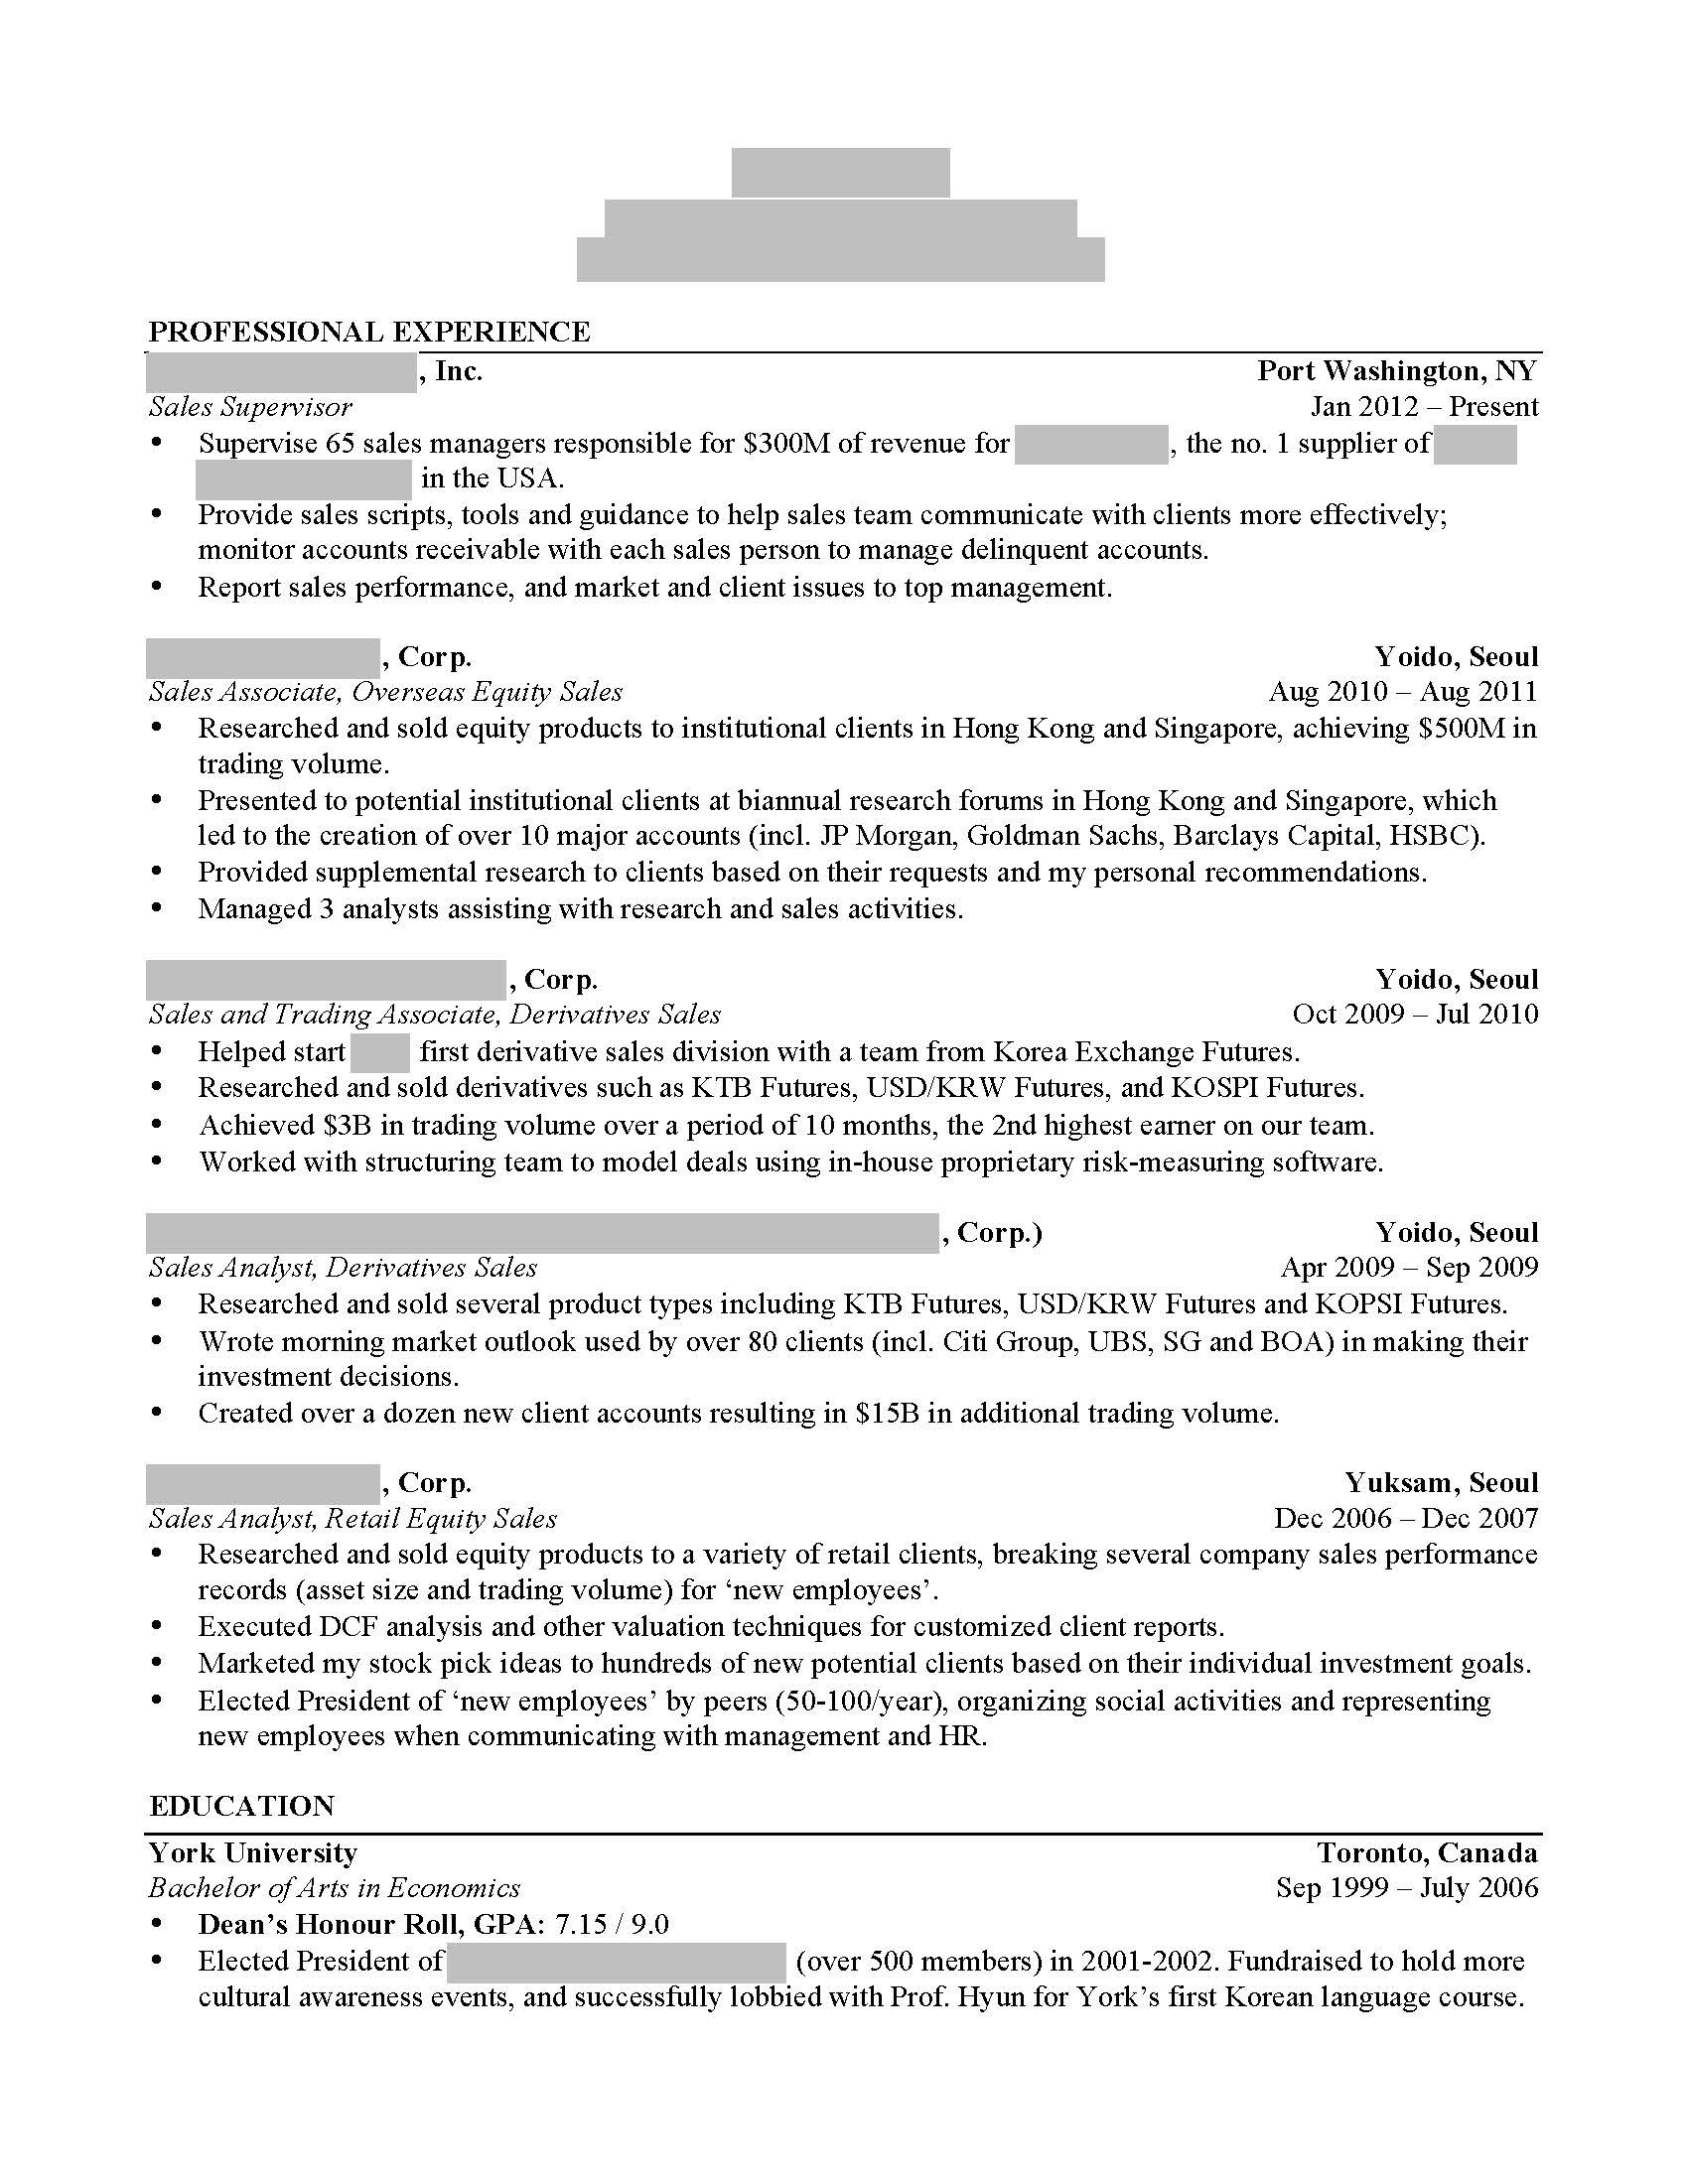 Uw Madison Business School Resume Template Resume Tips Archives – Â» touch Mba